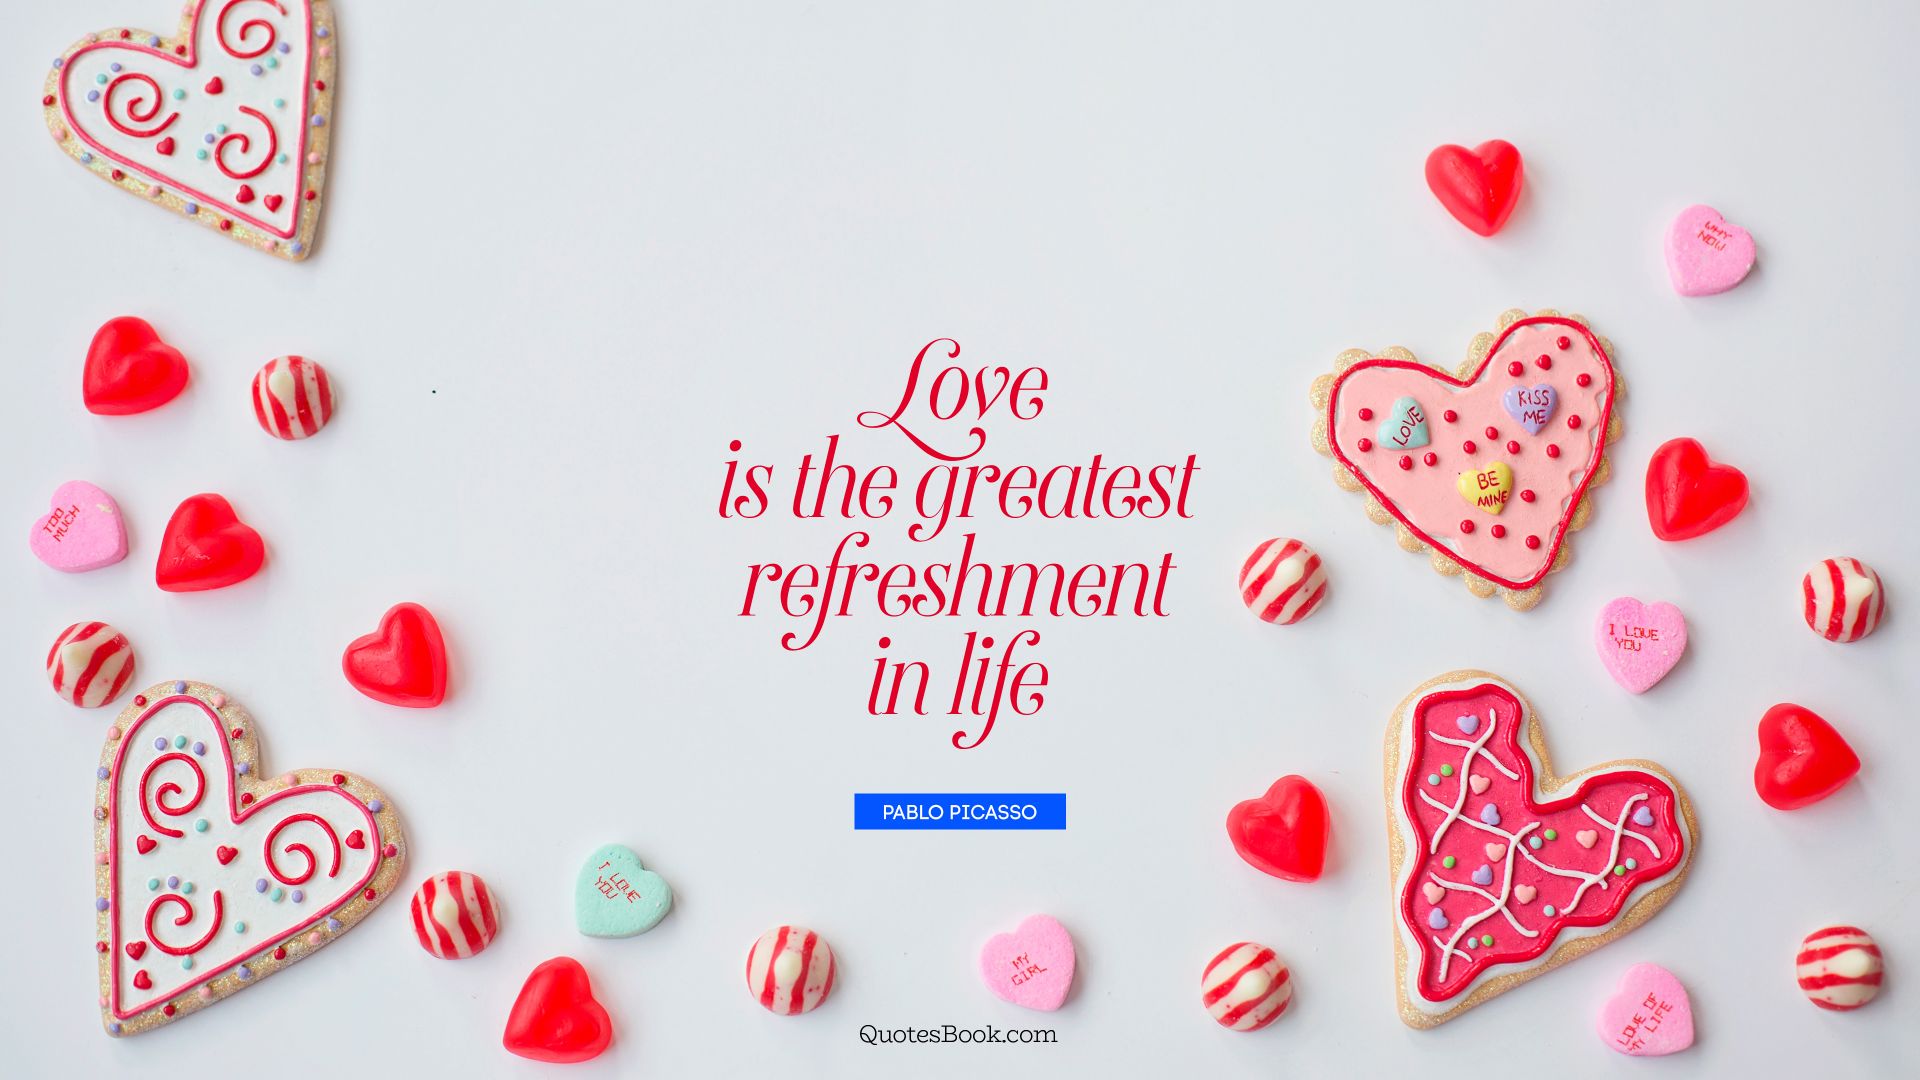 Love is the greatest refreshment in life. - Quote by Pablo Picasso